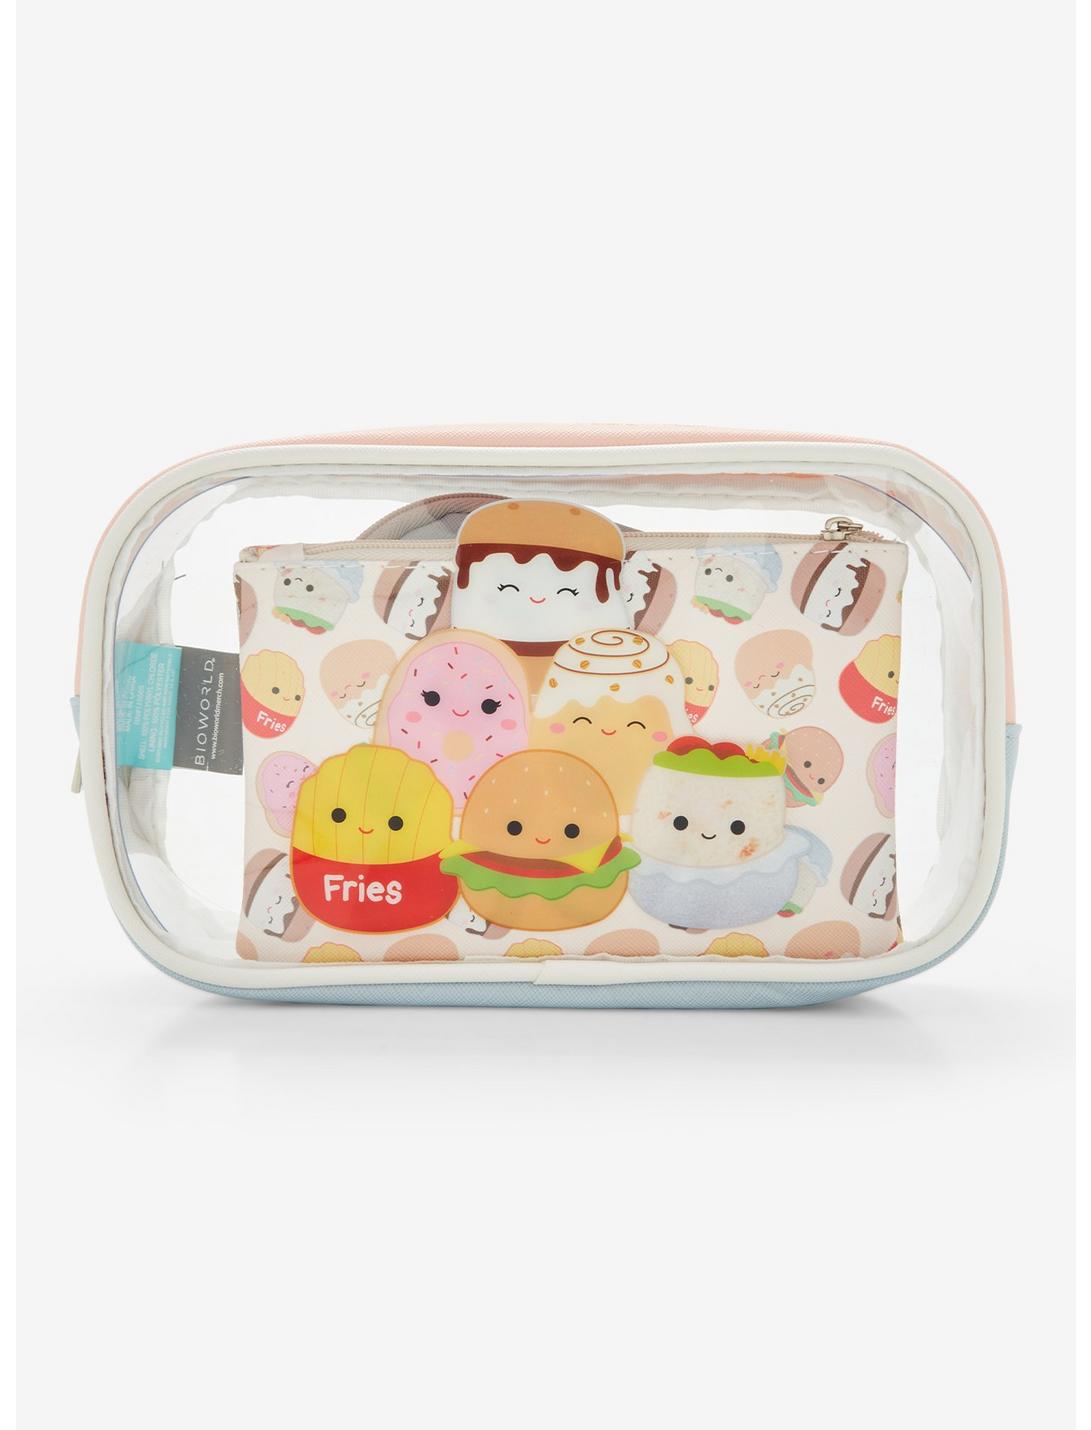 Squishmallows Foods Cosmetic Bag Set | BoxLunch